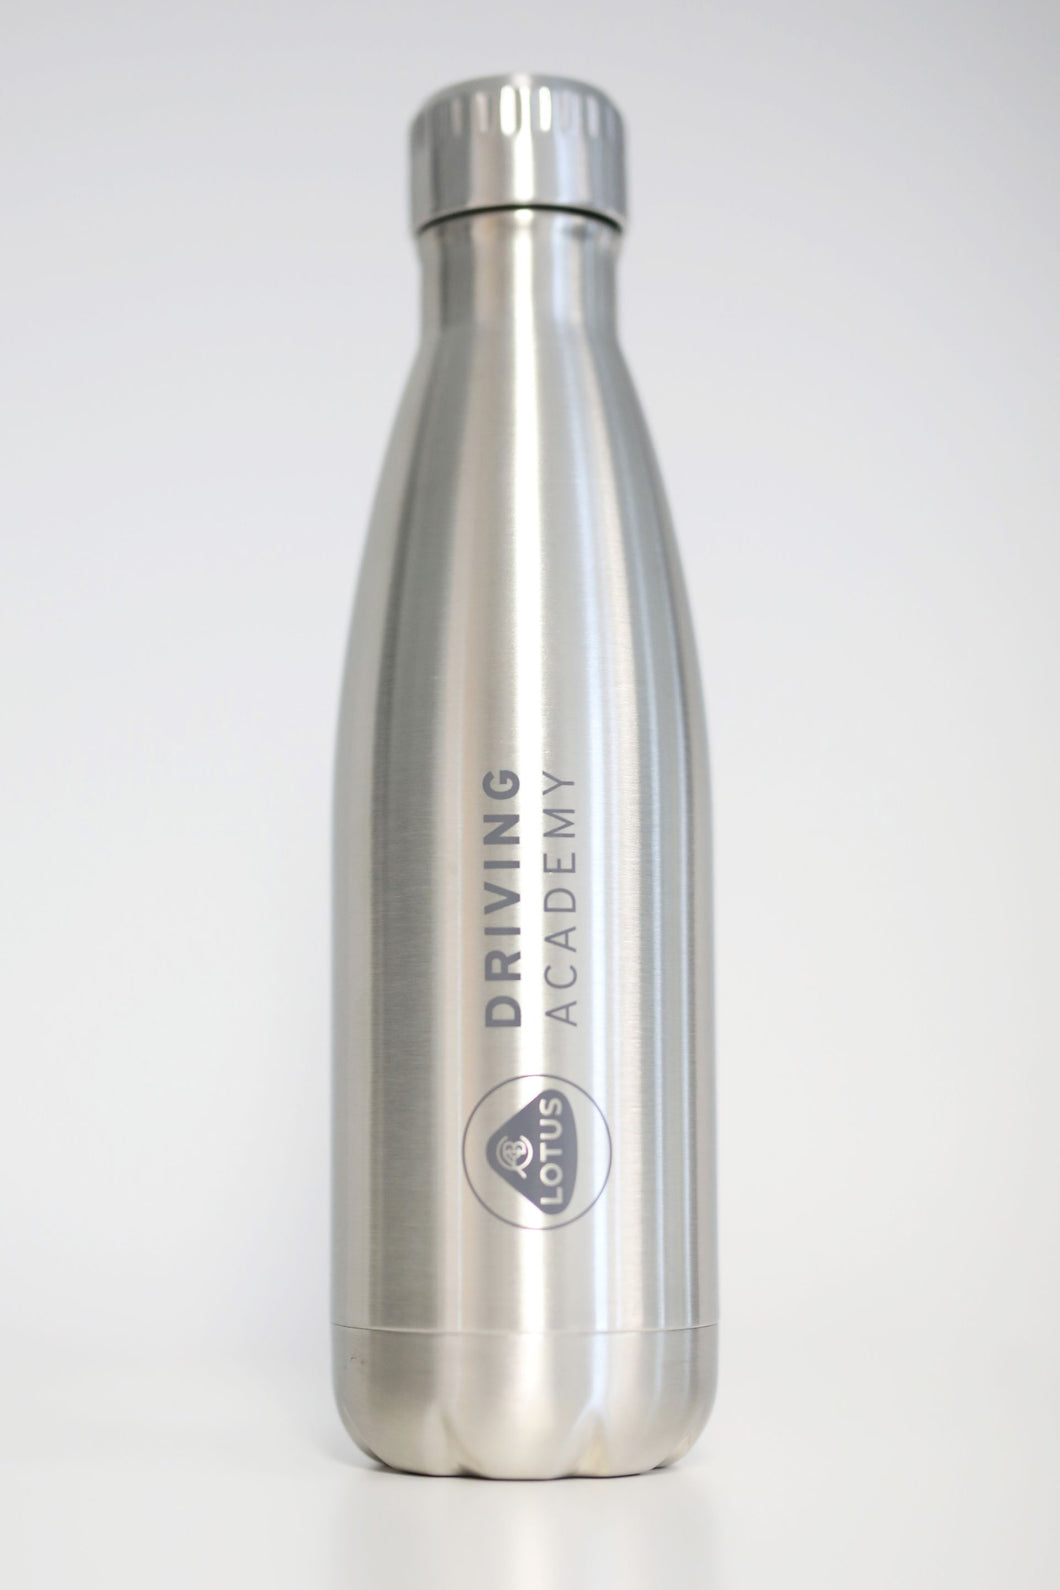 Lotus Driving Academy Water Bottle